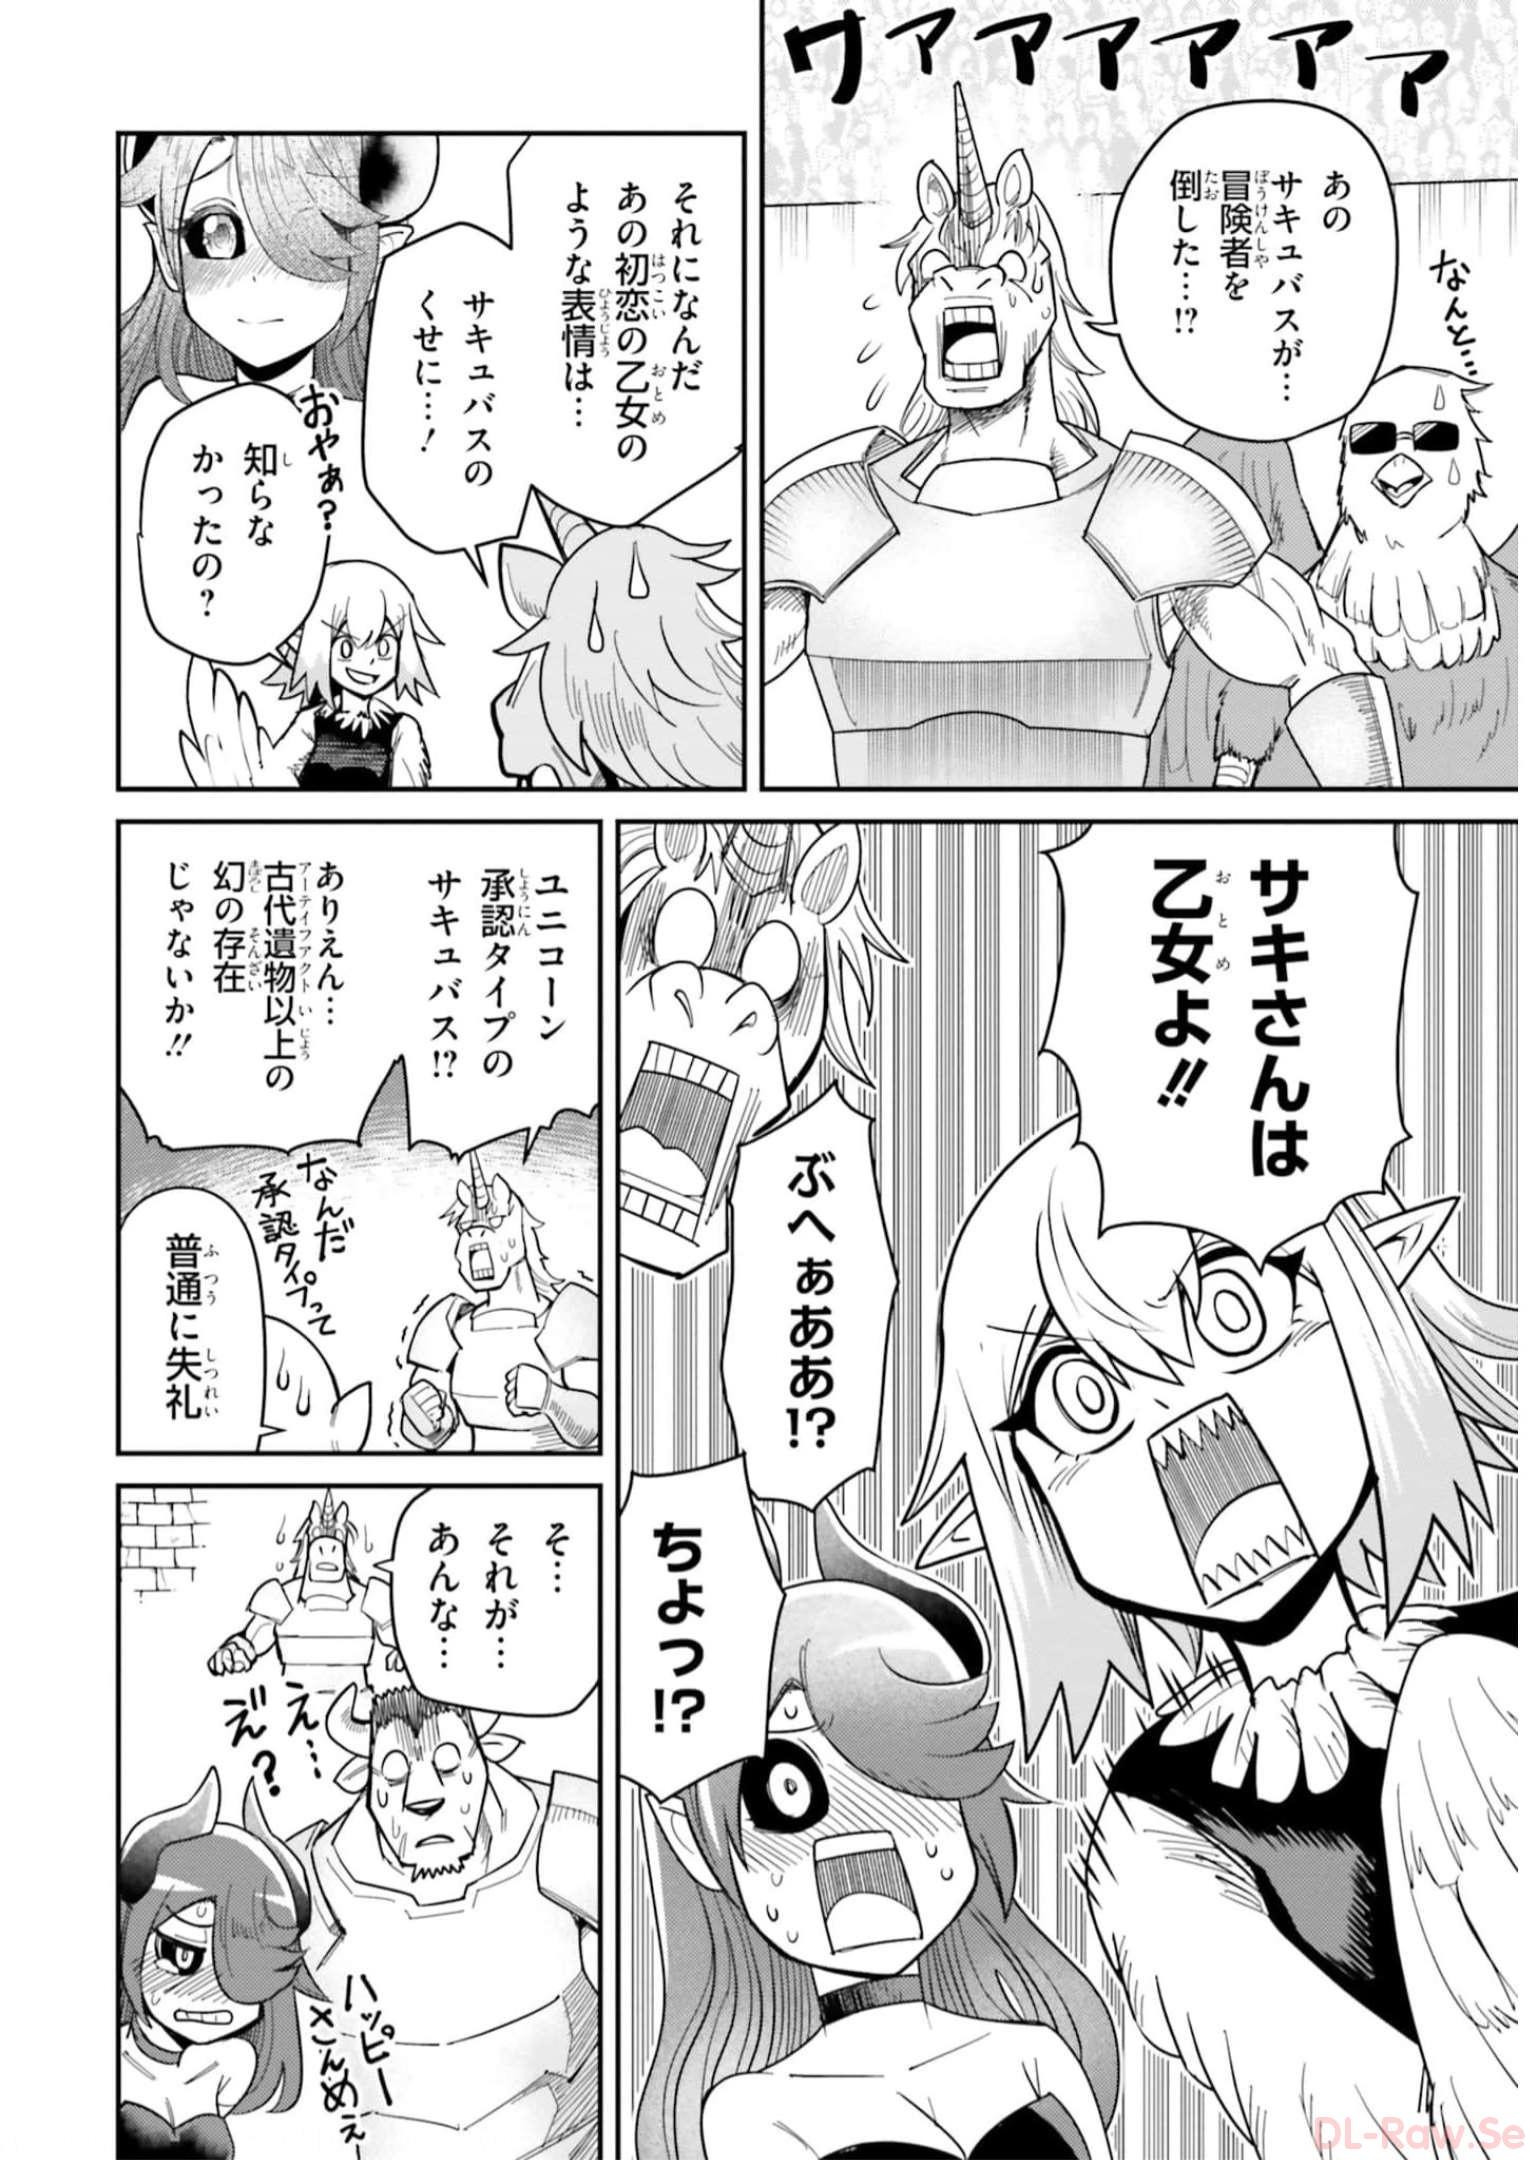 Dungeon Friends Forever Dungeon’s Childhood Friend ダンジョンの幼なじみ 第20話 - Page 20